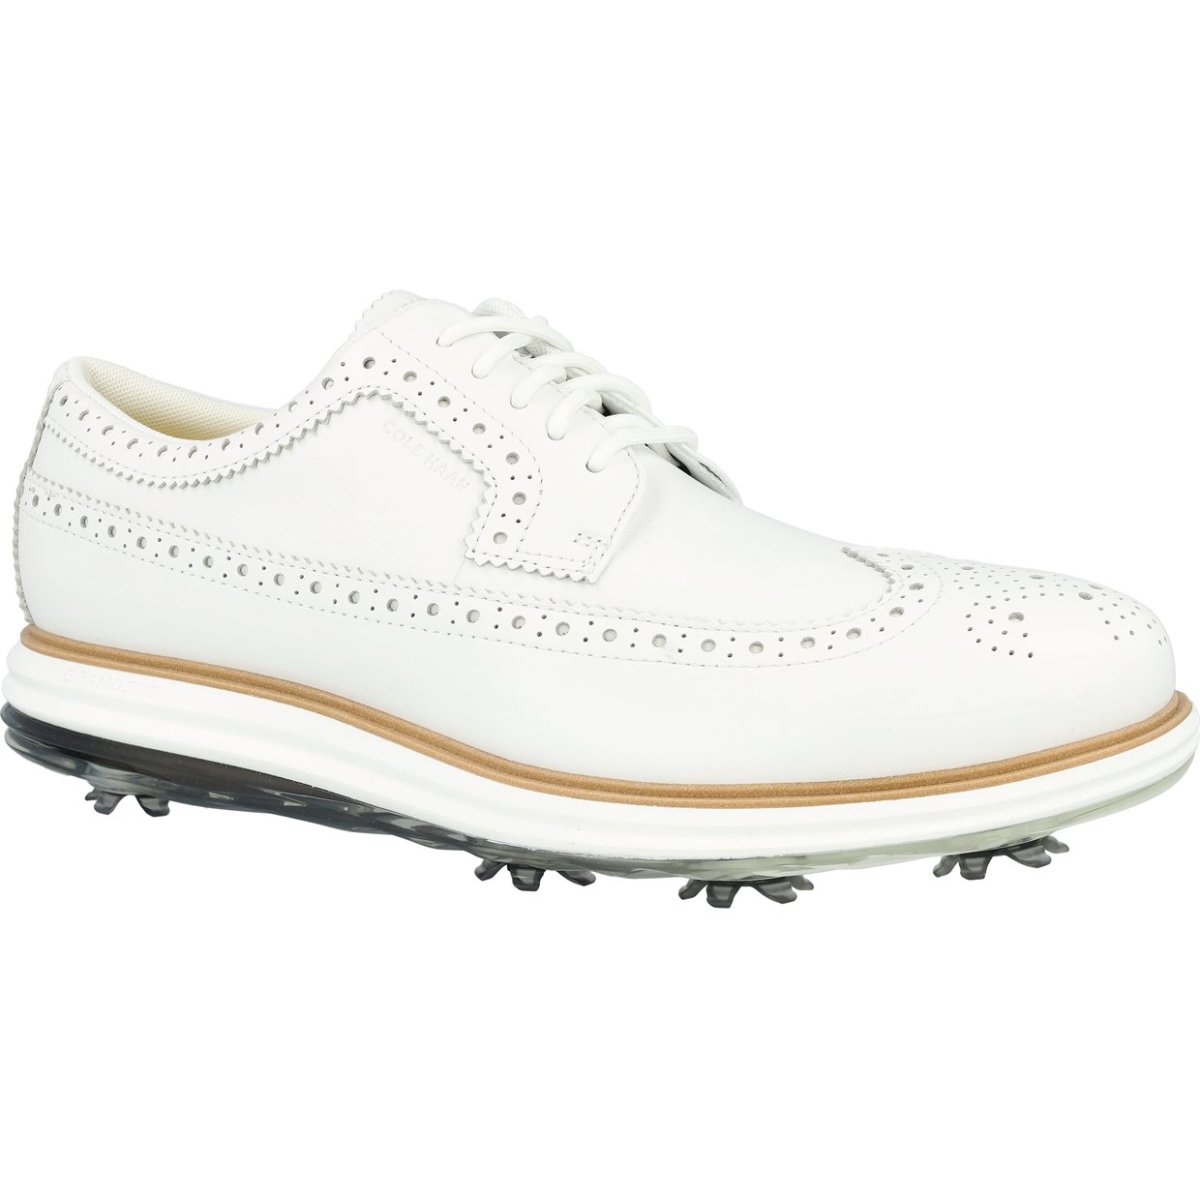 Shop Cole Haan golf shoes on Sports Illustrated Golf.